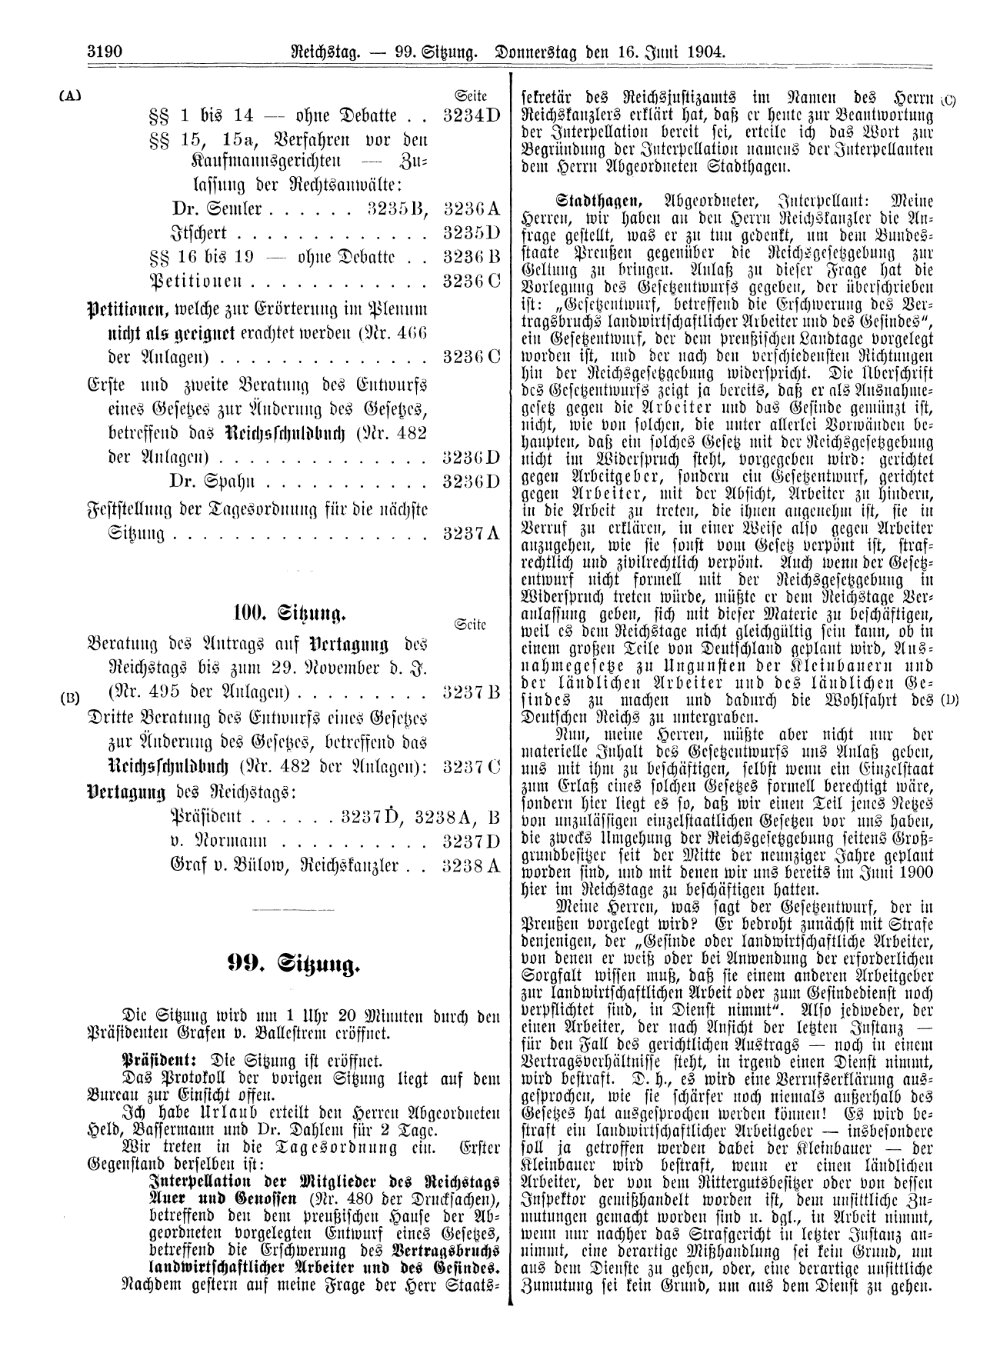 Scan of page 3190